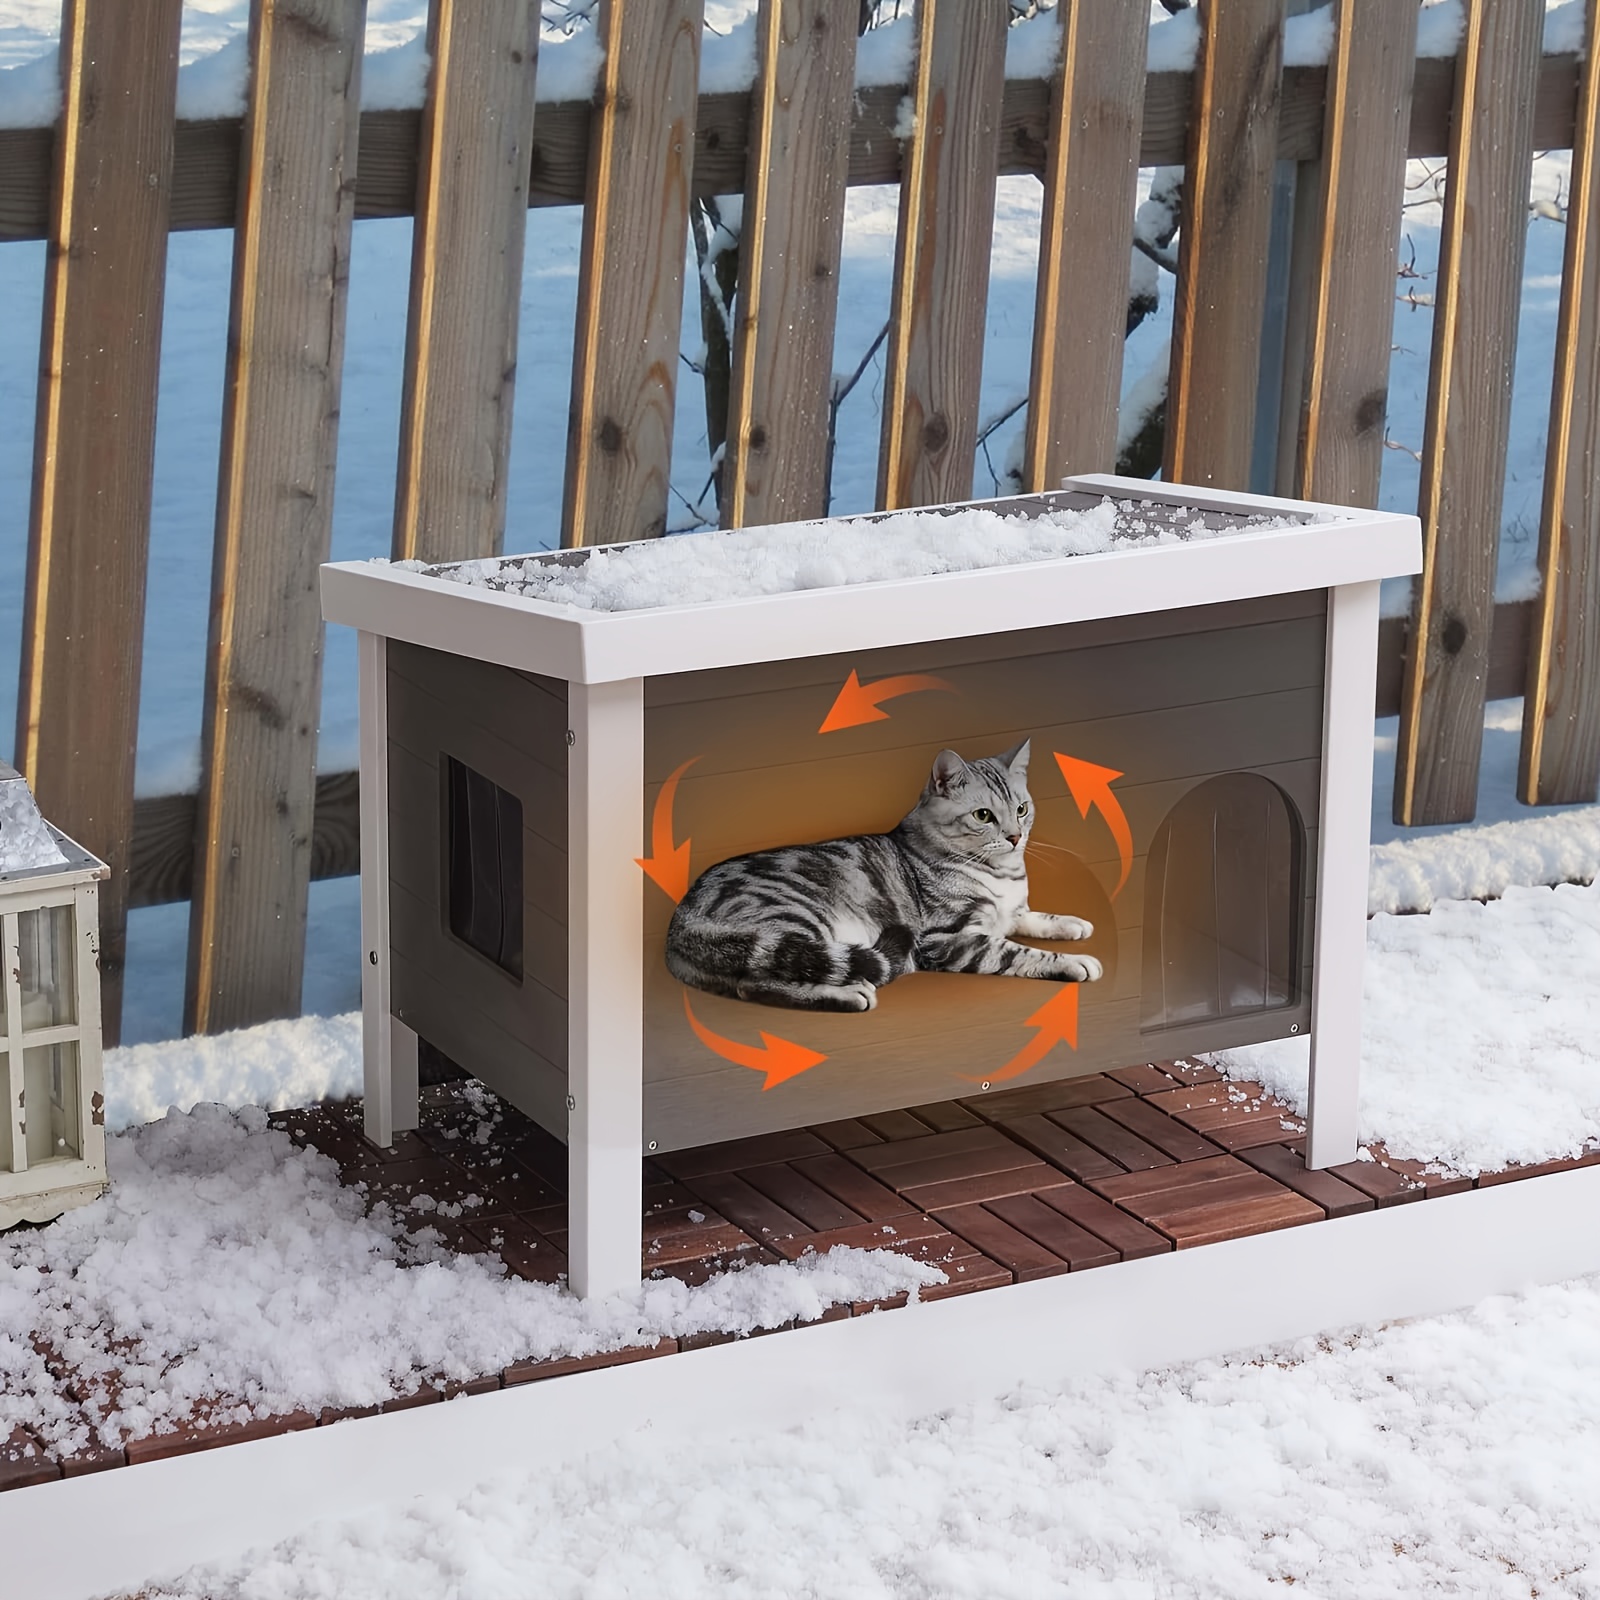 

Insulated Outdoor Cat House, Ps Material Weatherproof Cat House With Escape Door, Elevated Feral Cat Shelter With Openable Roof For Multiple Cats, Grey